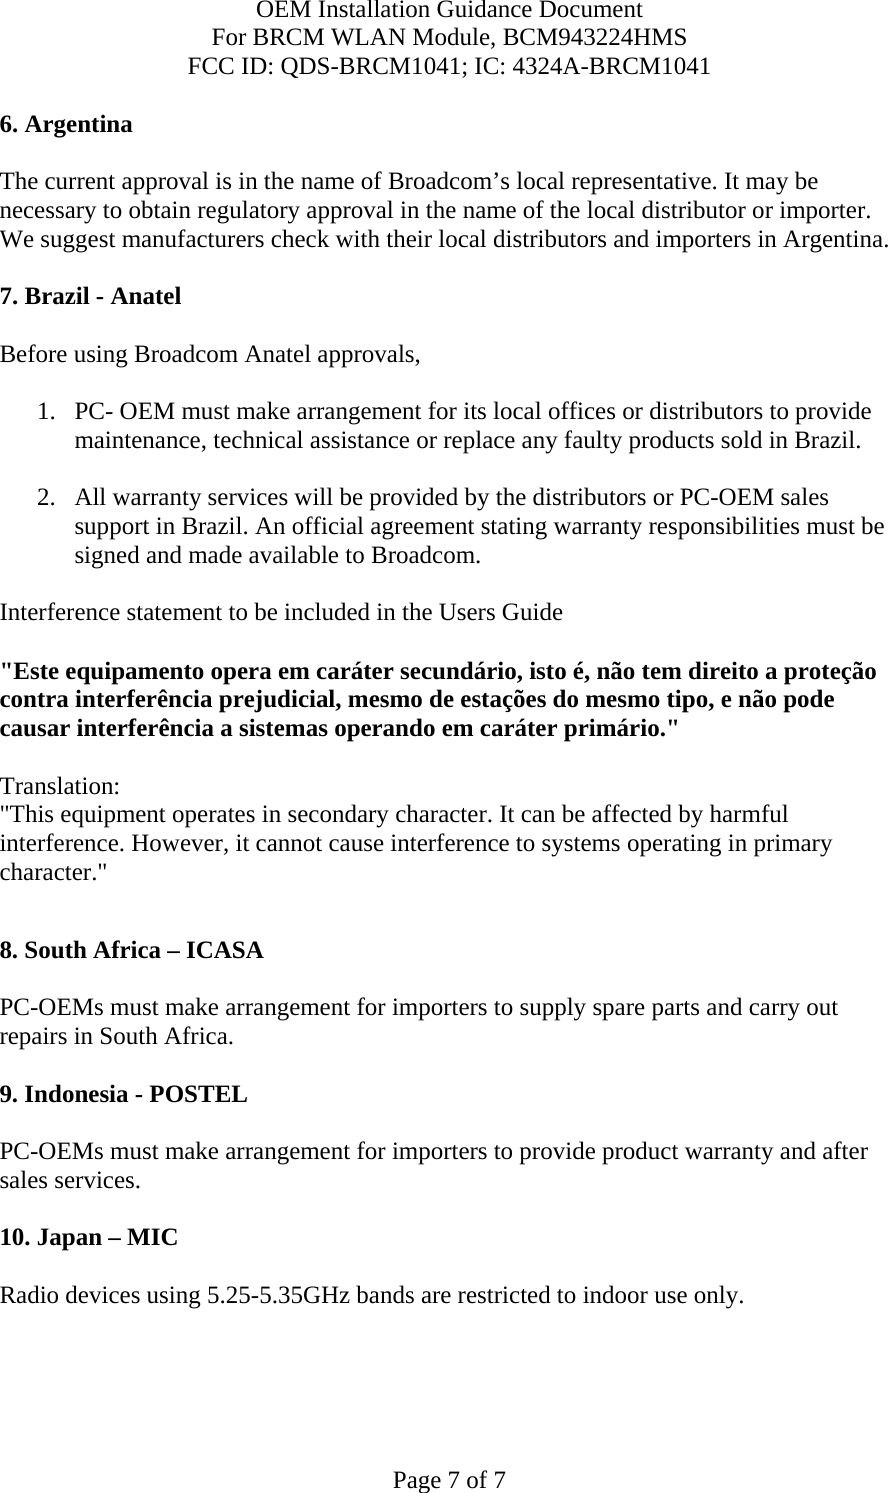 OEM Installation Guidance Document For BRCM WLAN Module, BCM943224HMS FCC ID: QDS-BRCM1041; IC: 4324A-BRCM1041  Page 7 of 7 6. Argentina   The current approval is in the name of Broadcom’s local representative. It may be necessary to obtain regulatory approval in the name of the local distributor or importer. We suggest manufacturers check with their local distributors and importers in Argentina.  7. Brazil - Anatel   Before using Broadcom Anatel approvals,   1. PC- OEM must make arrangement for its local offices or distributors to provide maintenance, technical assistance or replace any faulty products sold in Brazil.   2. All warranty services will be provided by the distributors or PC-OEM sales support in Brazil. An official agreement stating warranty responsibilities must be signed and made available to Broadcom.   Interference statement to be included in the Users Guide &quot;Este equipamento opera em caráter secundário, isto é, não tem direito a proteção contra interferência prejudicial, mesmo de estações do mesmo tipo, e não pode causar interferência a sistemas operando em caráter primário.&quot; Translation:  &quot;This equipment operates in secondary character. It can be affected by harmful interference. However, it cannot cause interference to systems operating in primary character.&quot;    8. South Africa – ICASA  PC-OEMs must make arrangement for importers to supply spare parts and carry out repairs in South Africa.  9. Indonesia - POSTEL  PC-OEMs must make arrangement for importers to provide product warranty and after sales services.   10. Japan – MIC  Radio devices using 5.25-5.35GHz bands are restricted to indoor use only.  